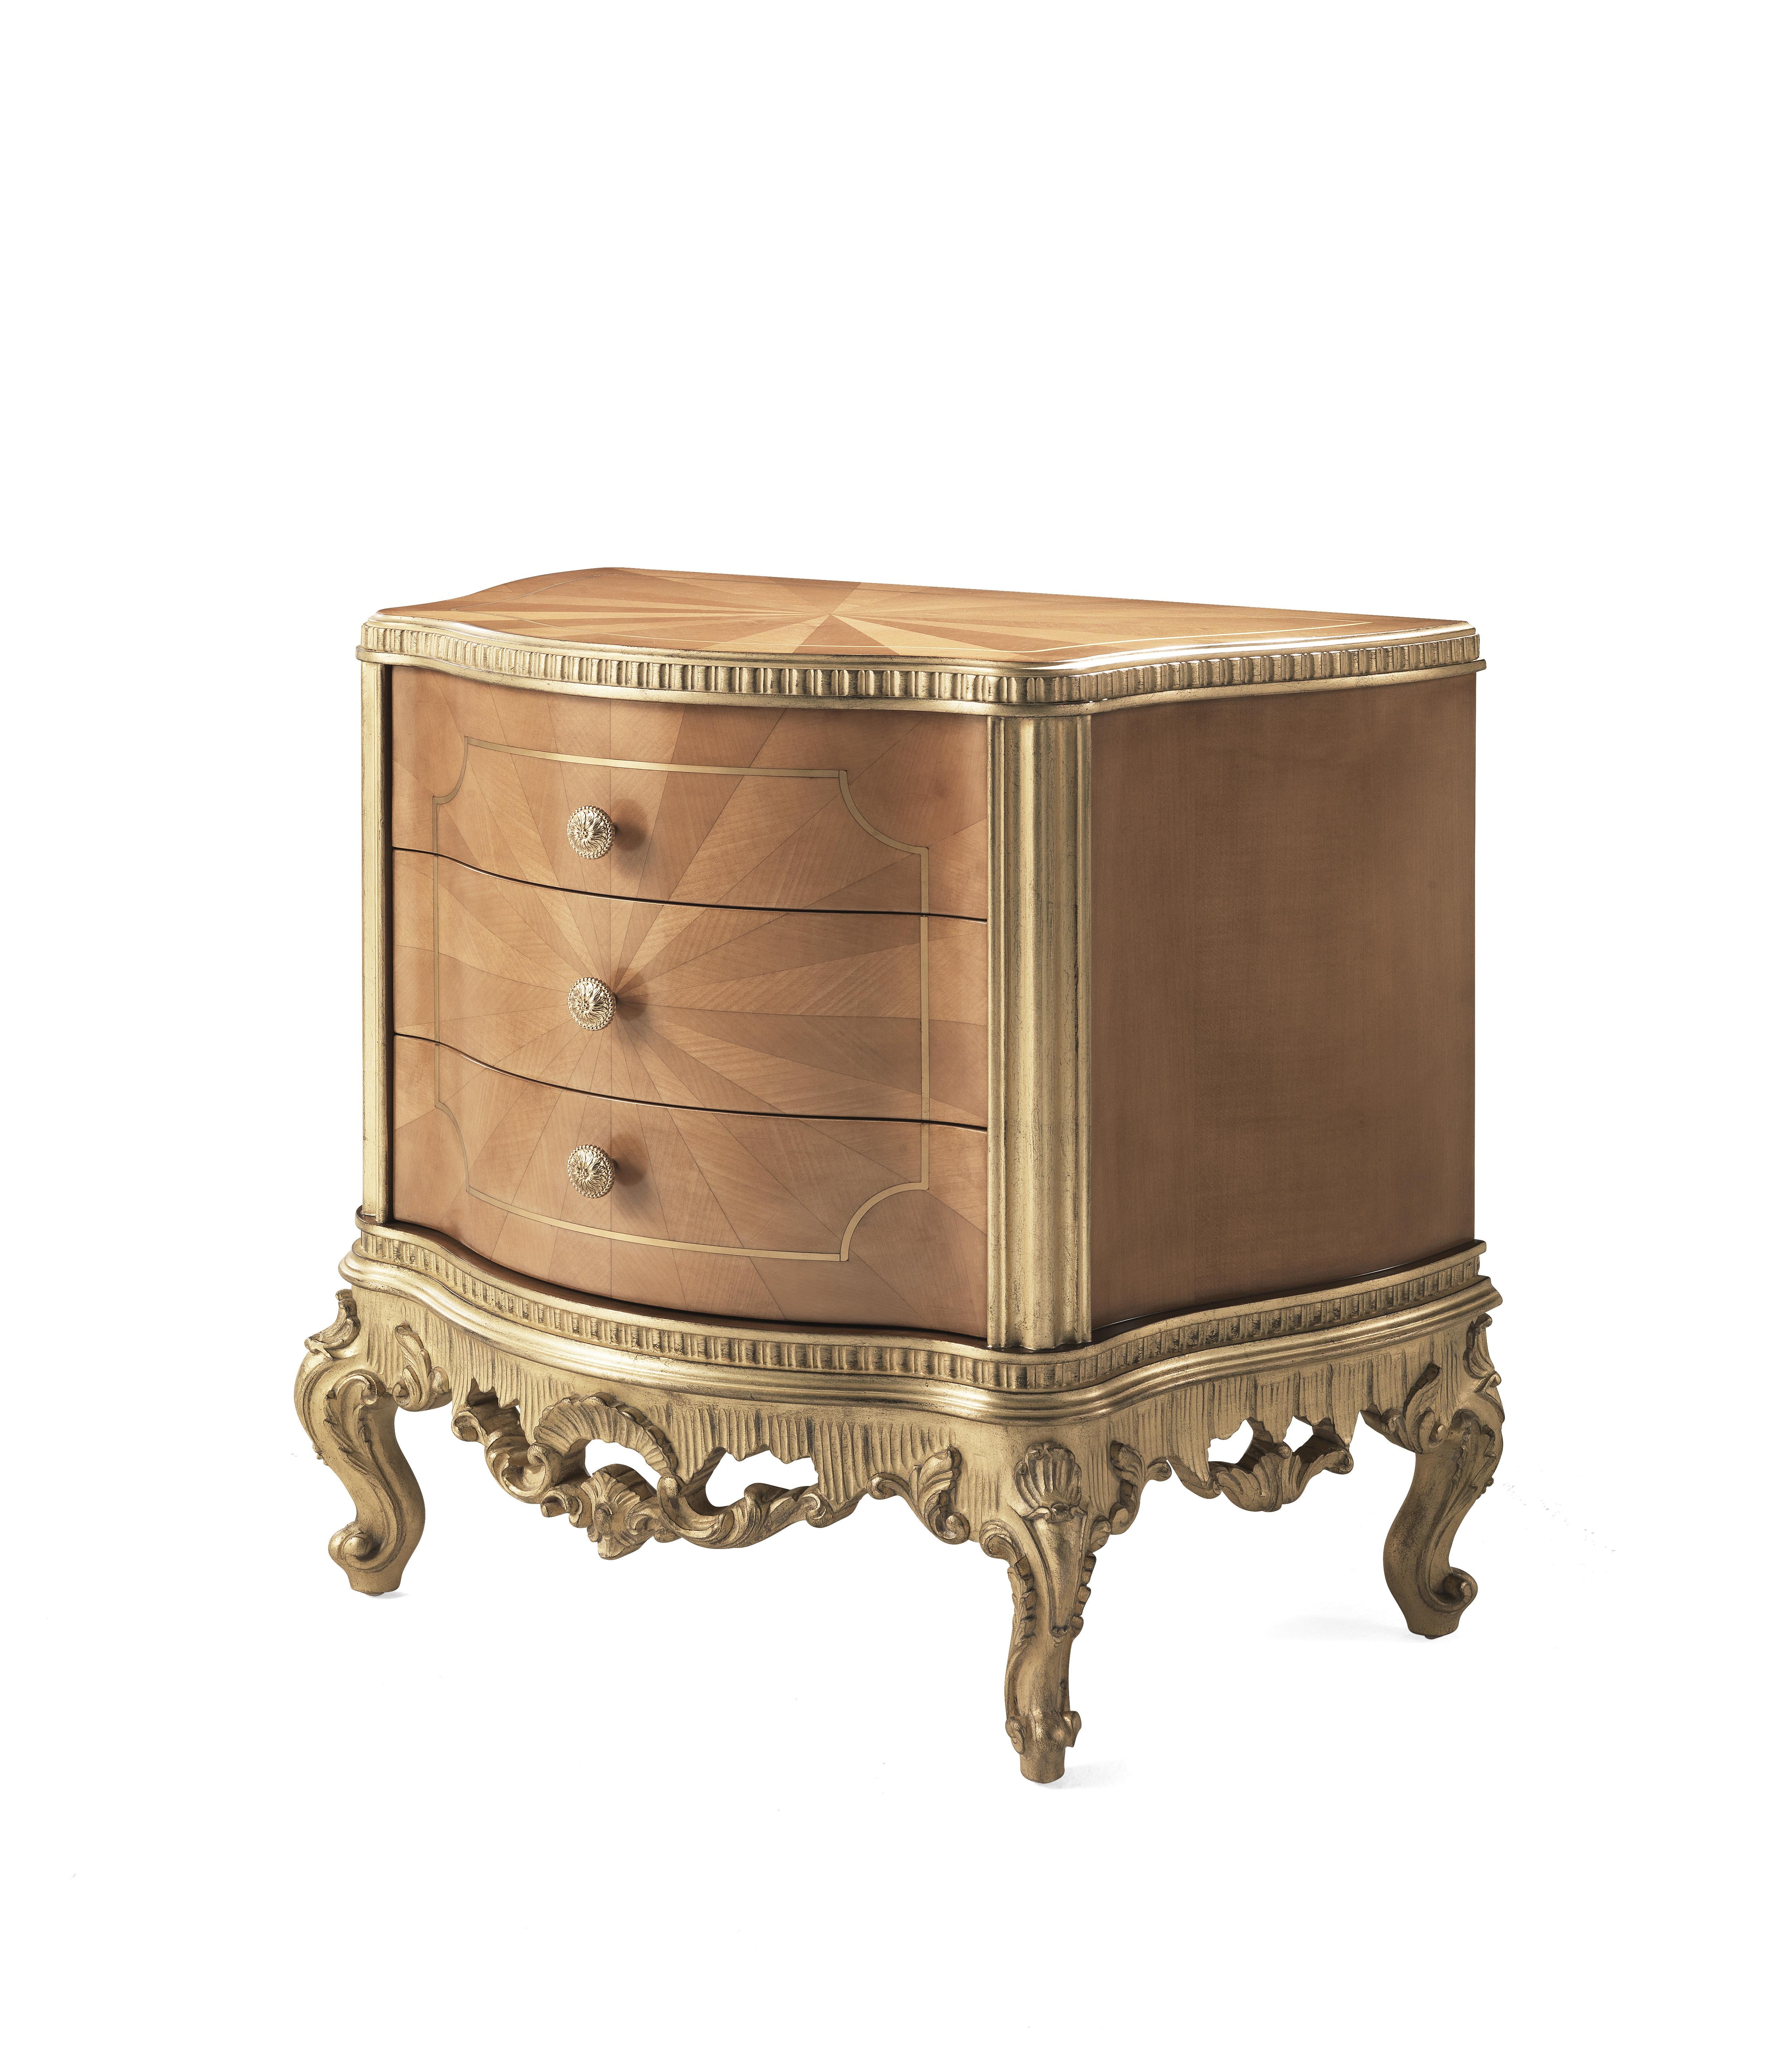 Ourlet is a line in a classic French style, expressing the refinement of the Italian artisan tradition. Made of maple, dyed in an elegant slightly darker shade, it features light and bright decorative brass inserts and it is enriched by